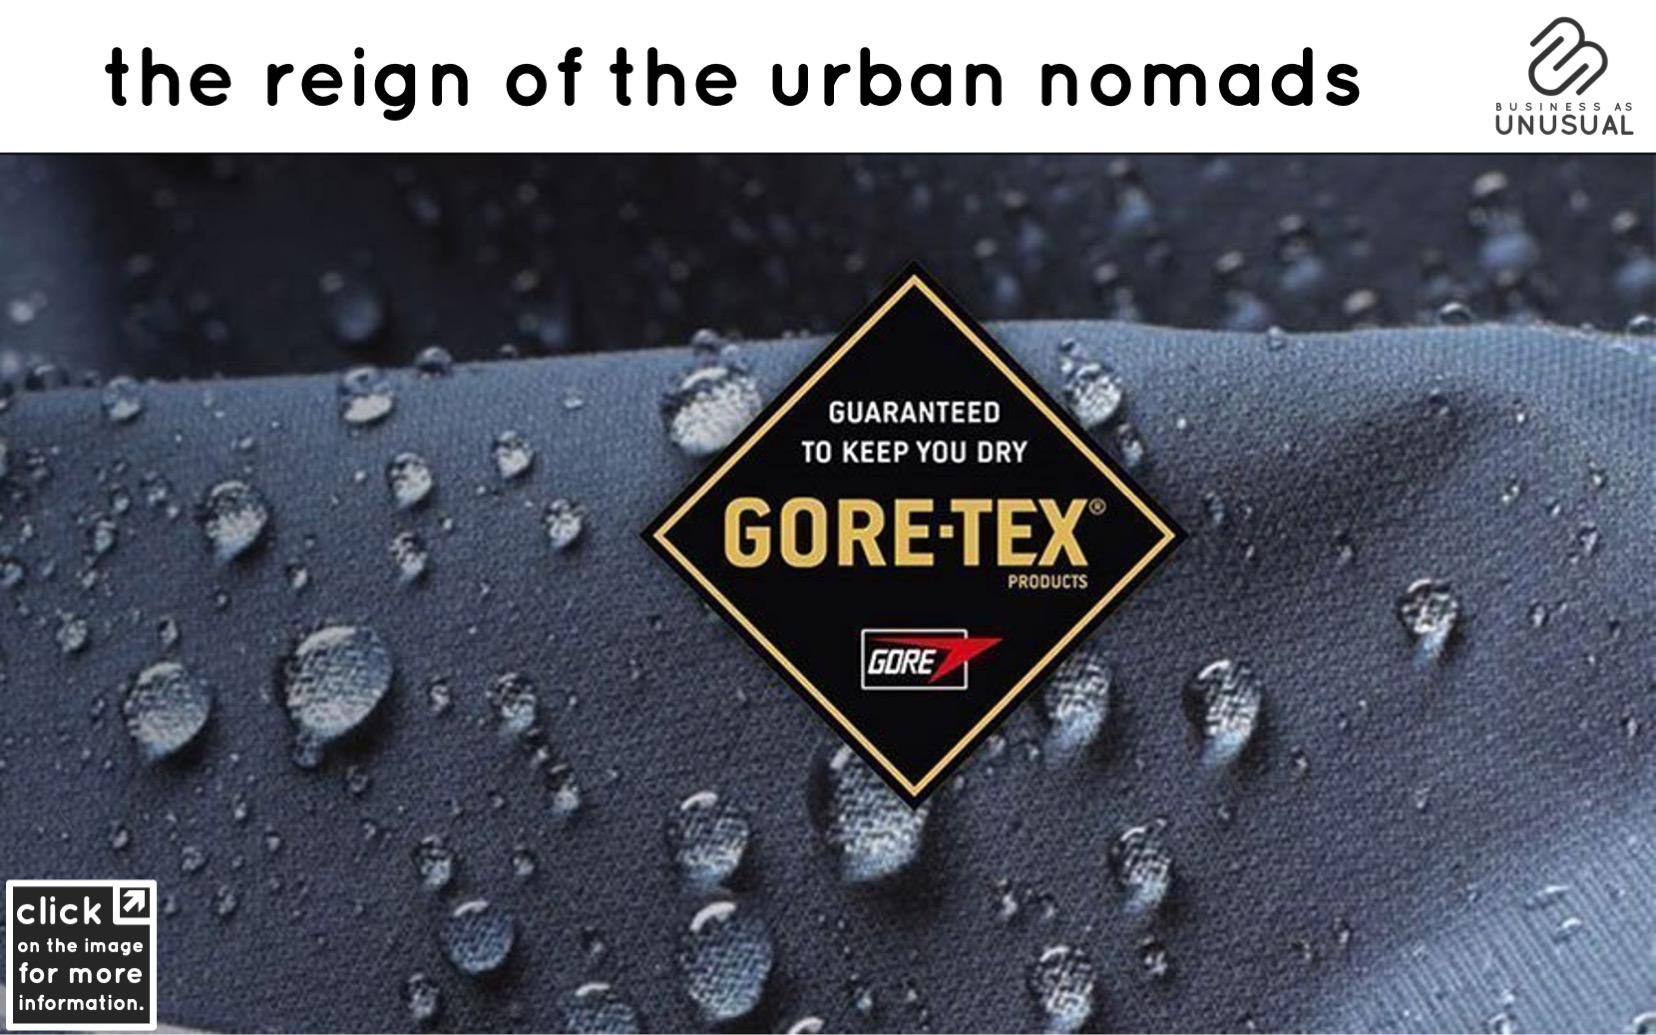 The Reign of the Urban Nomads - Gore-Tex